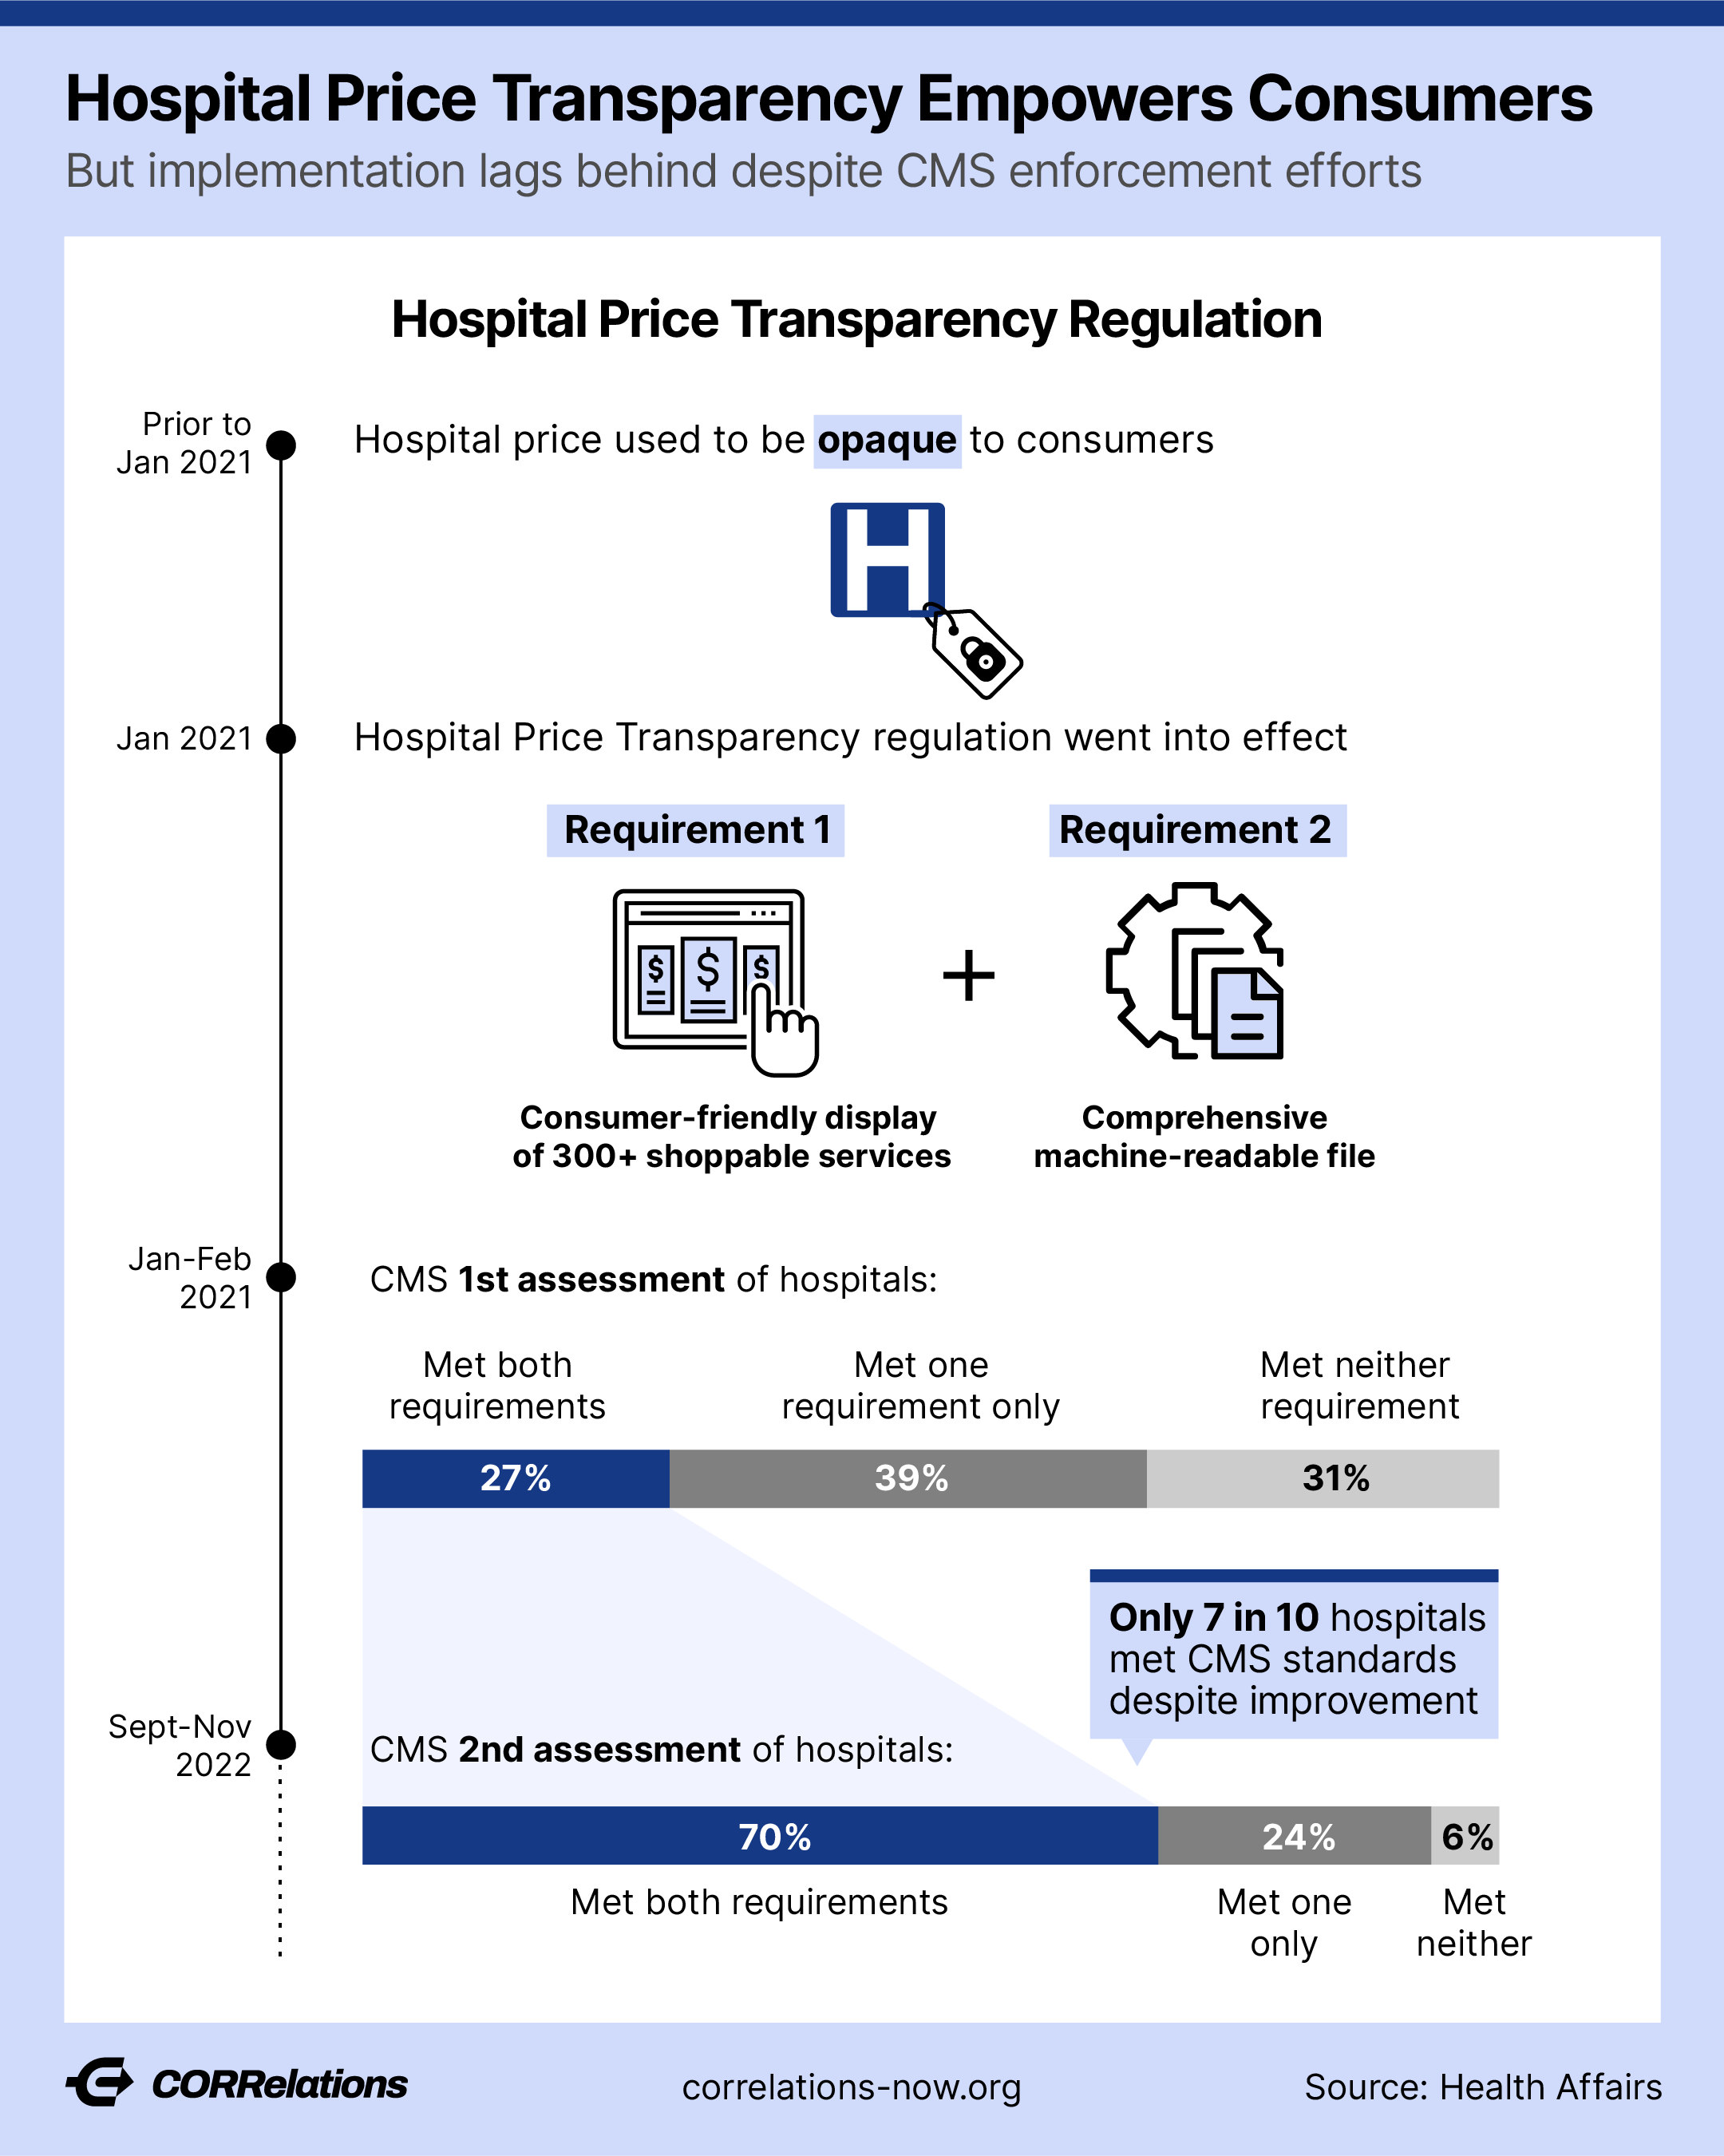 Do Patients Know the Price?